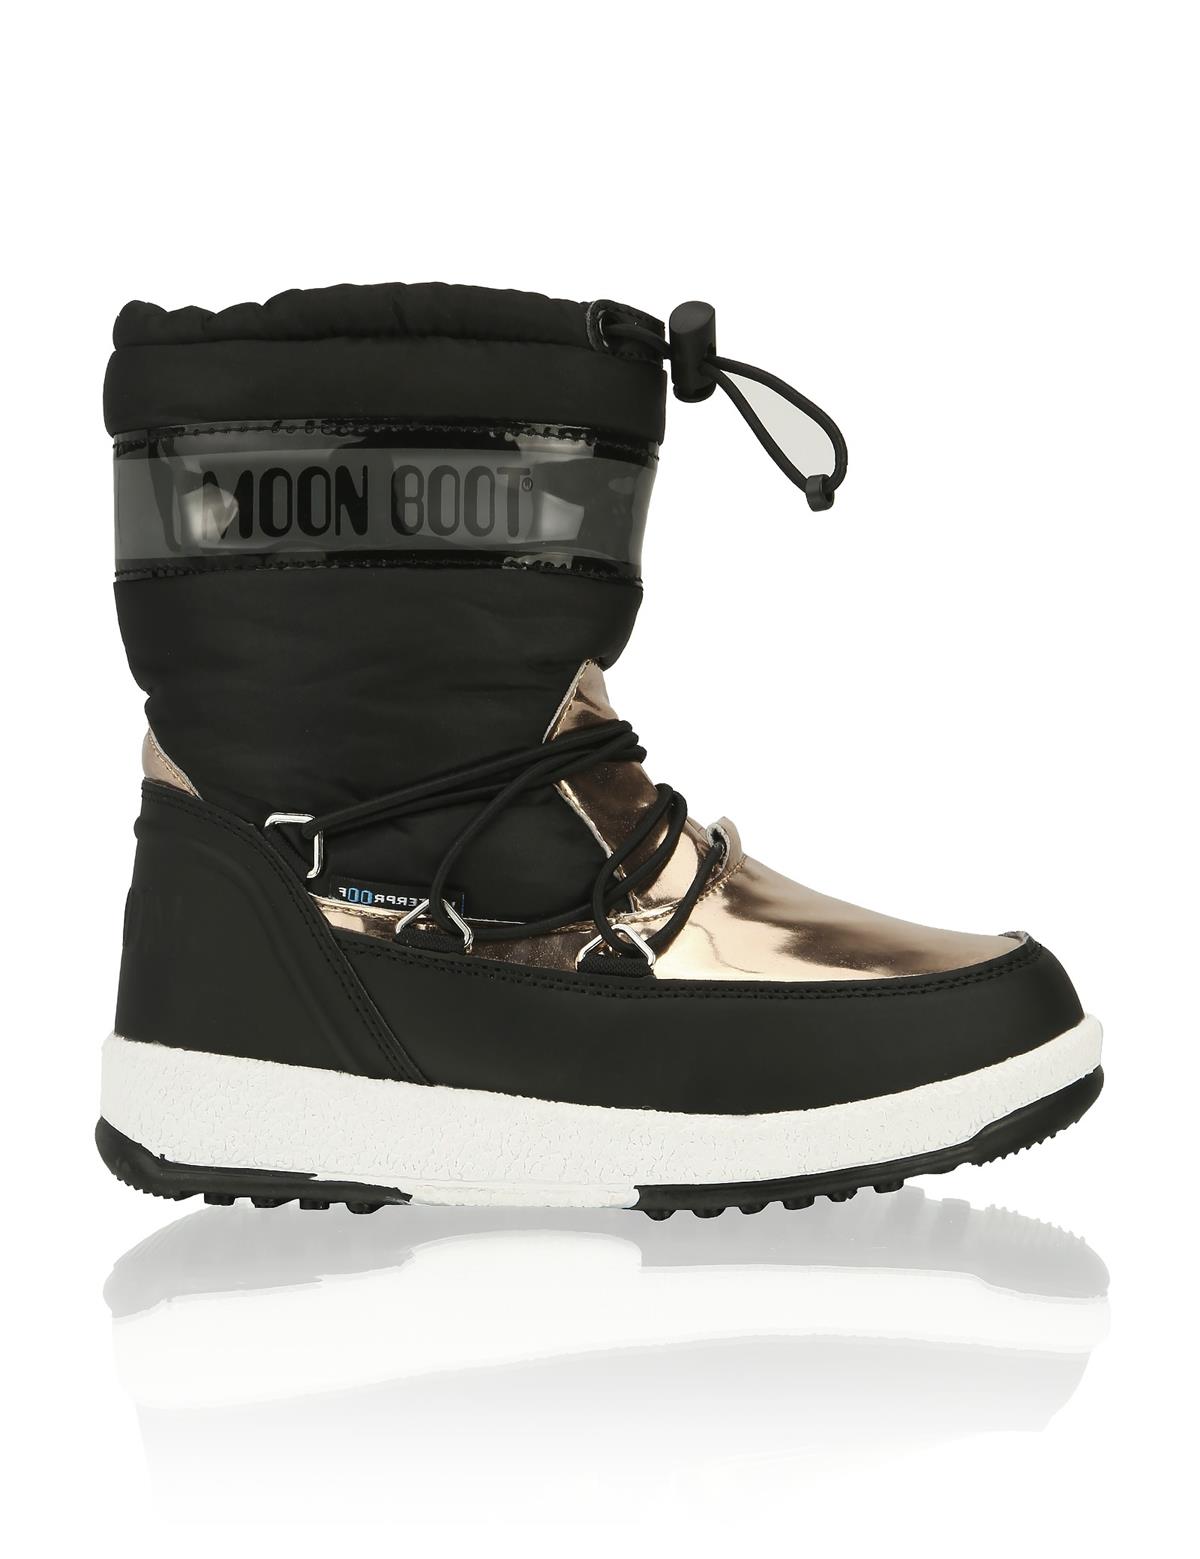 HUMANIC 109 Moon Boots Kids Snow Boot EUR 84,95 3623800320